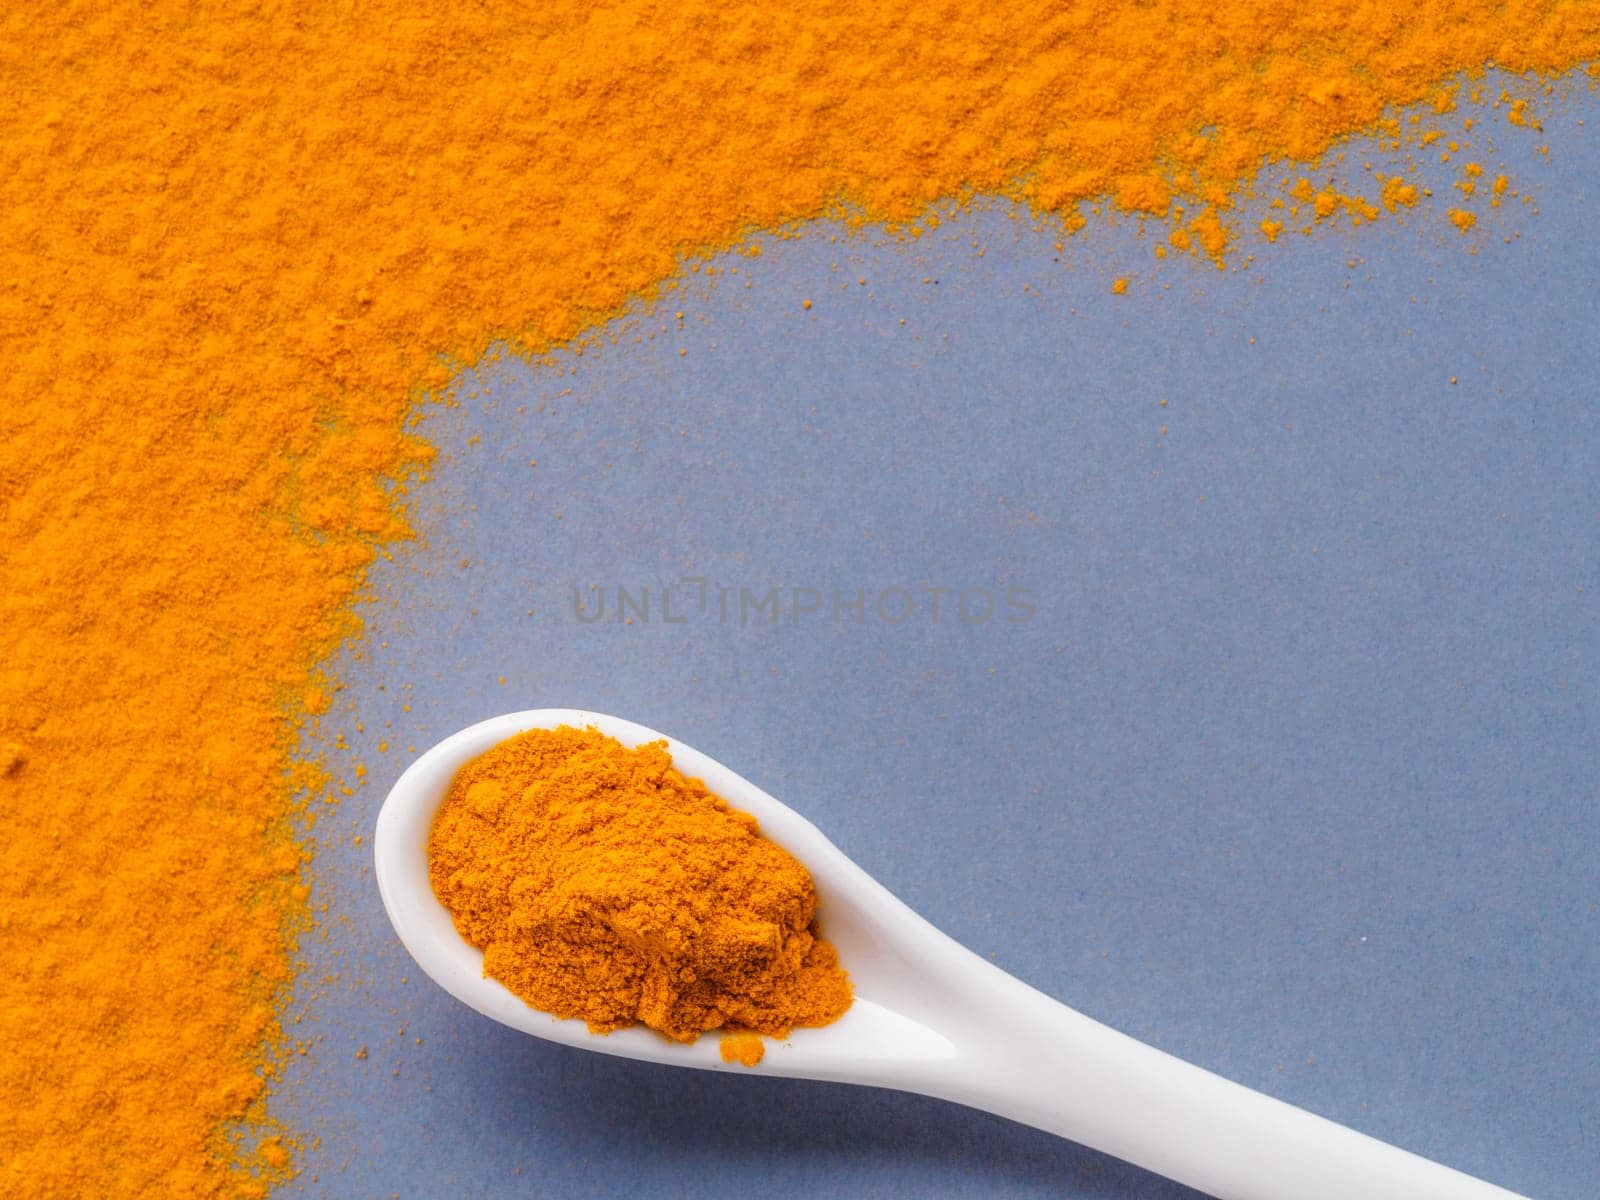 Turmeric Powder or Curcuma longa and white spoon with turmeric powder on gray background. Top view. Copy space for text.